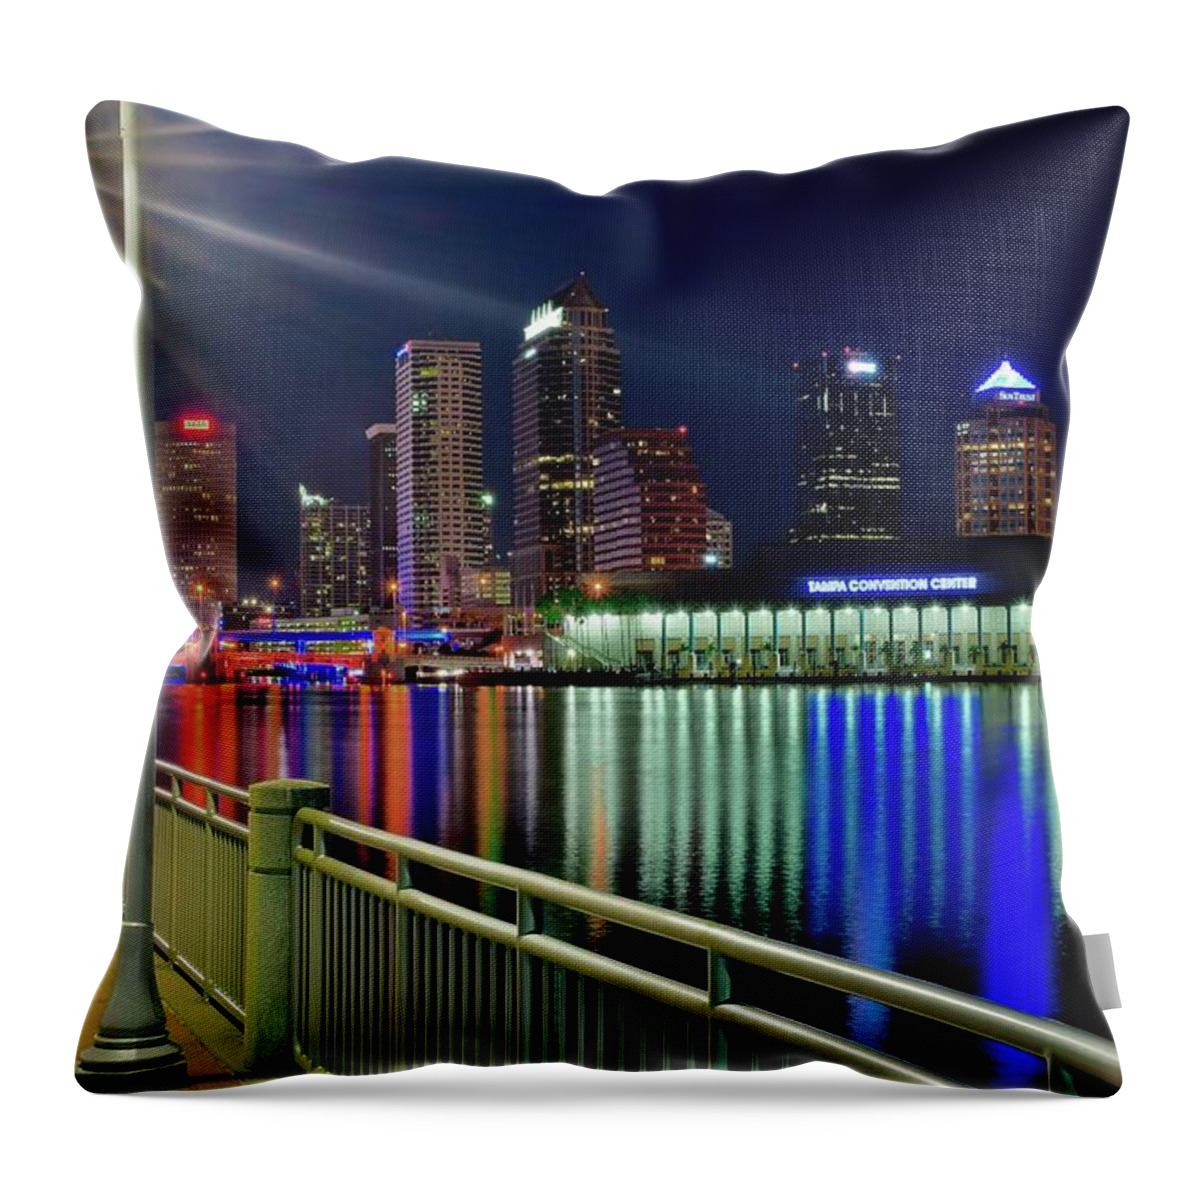 Tampa Throw Pillow featuring the photograph General Hospital View of Tampa by Frozen in Time Fine Art Photography